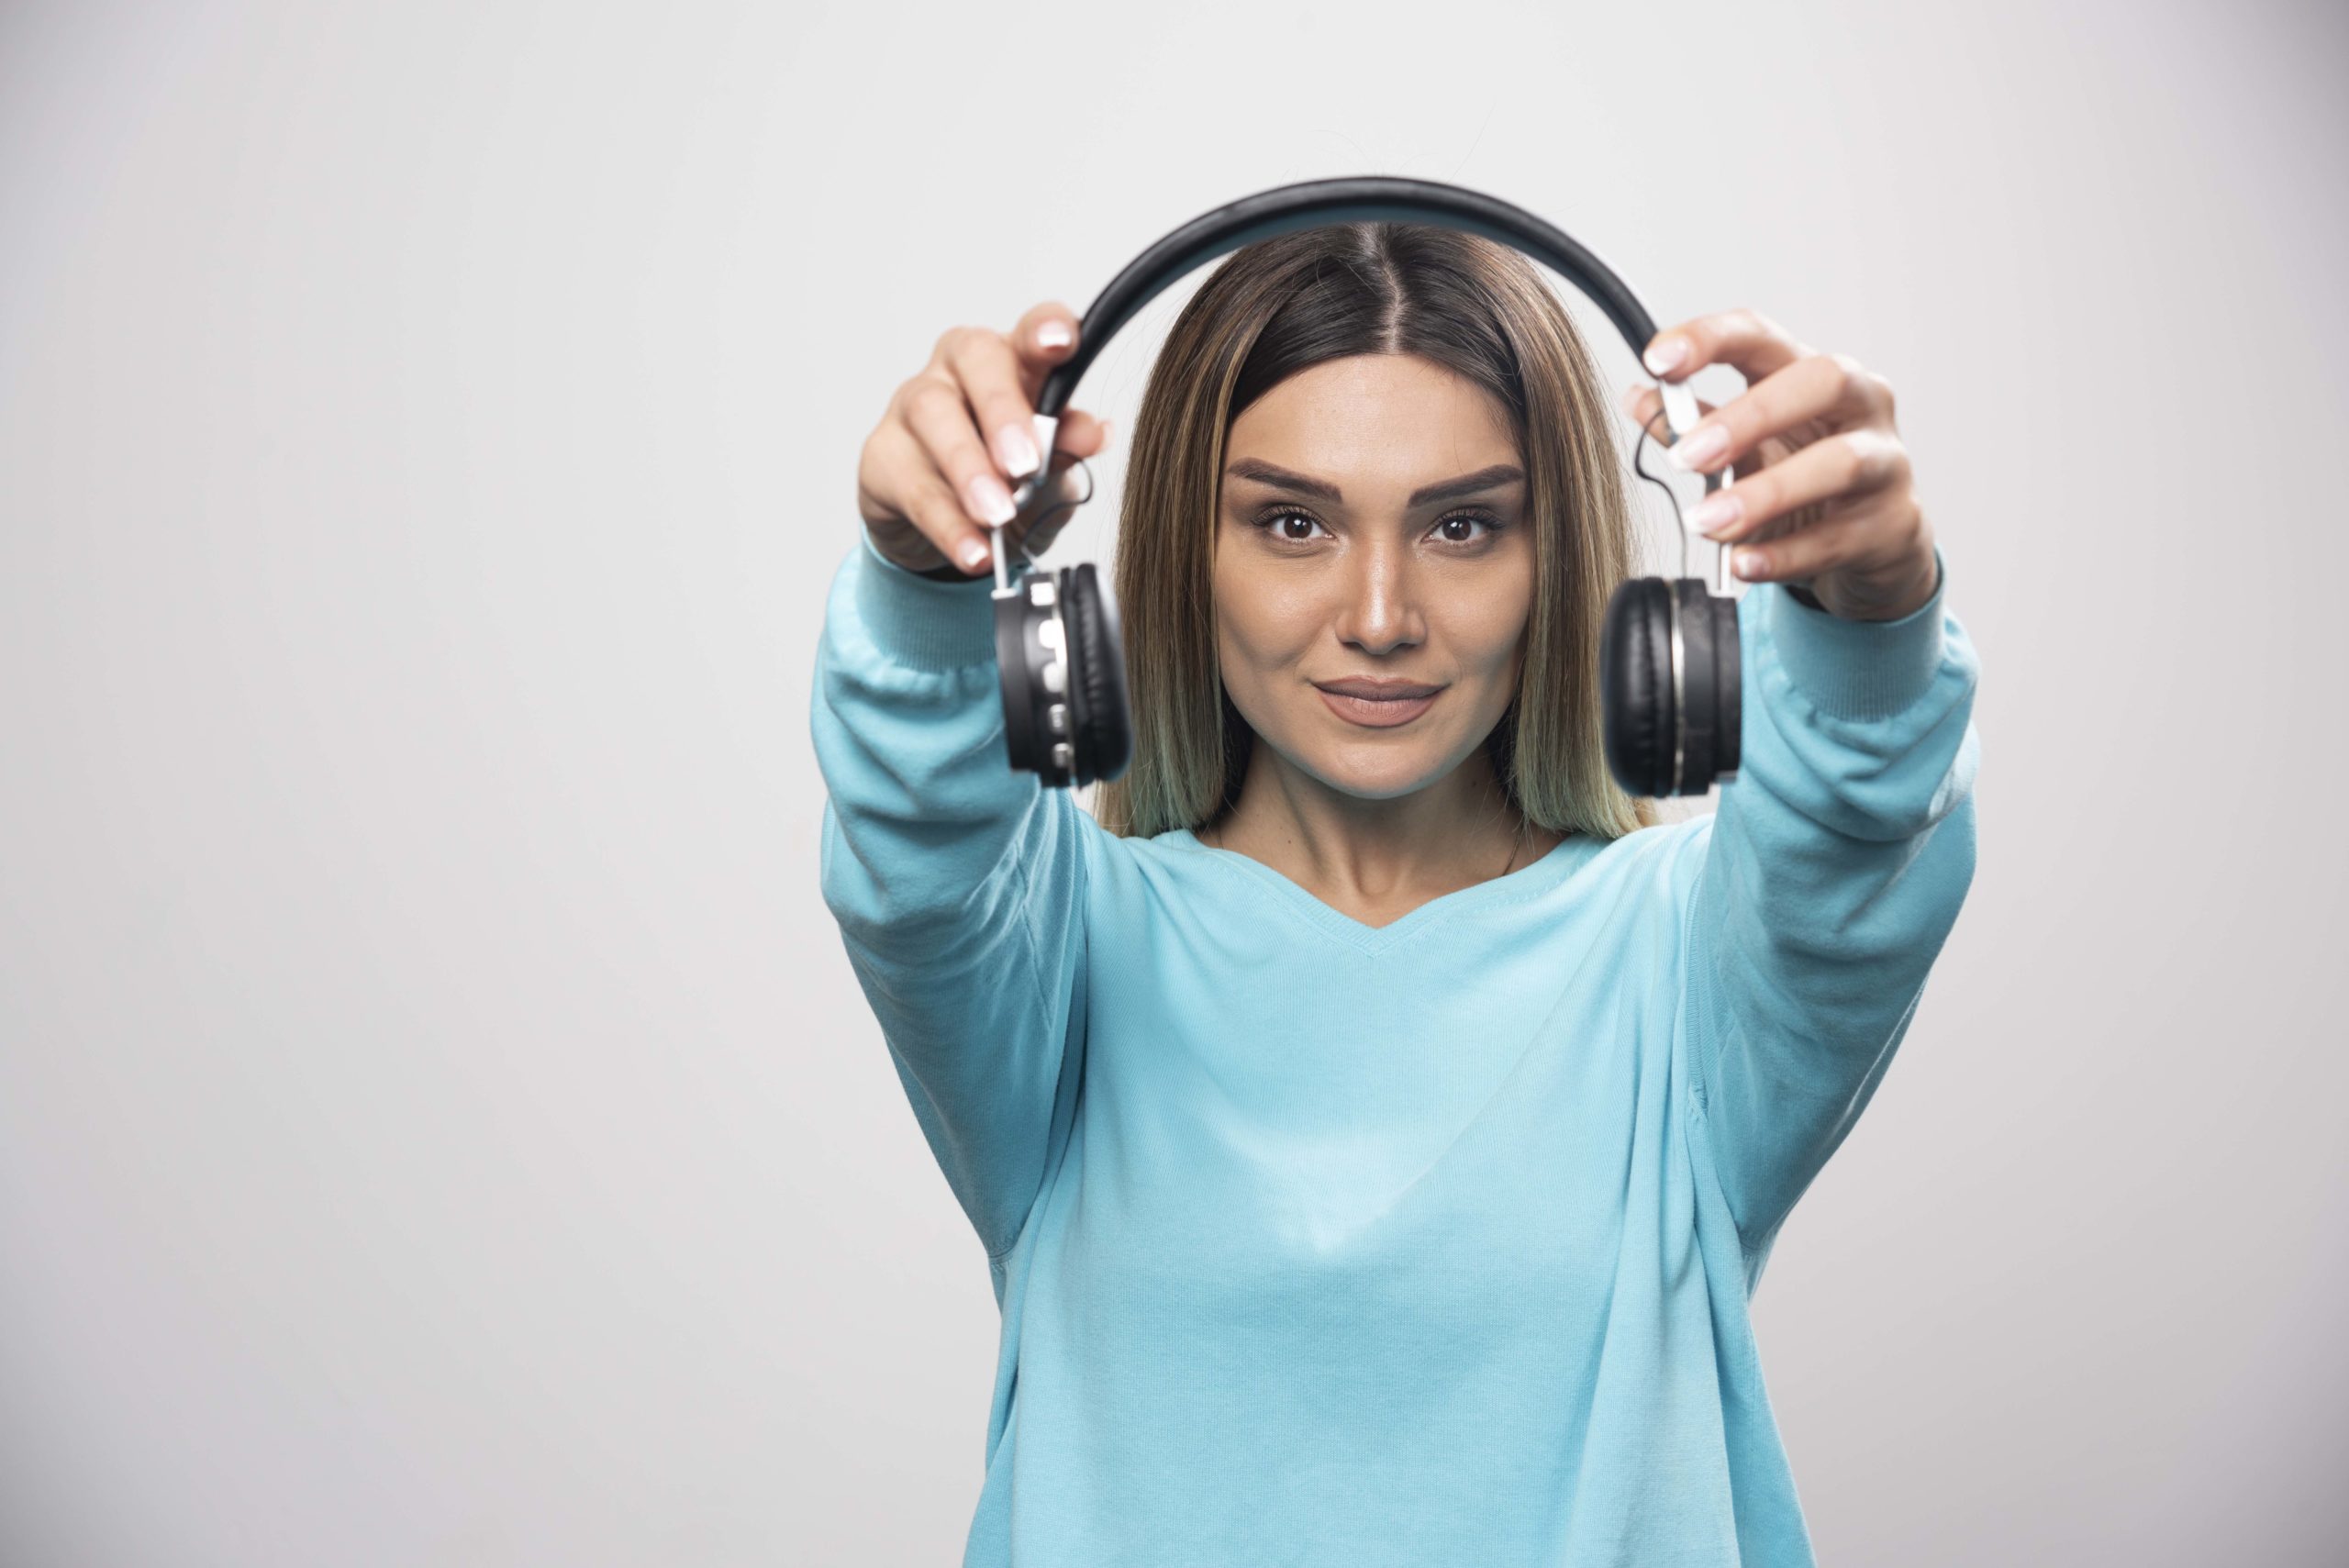 Holding headphones at arms length (From: Freepik)